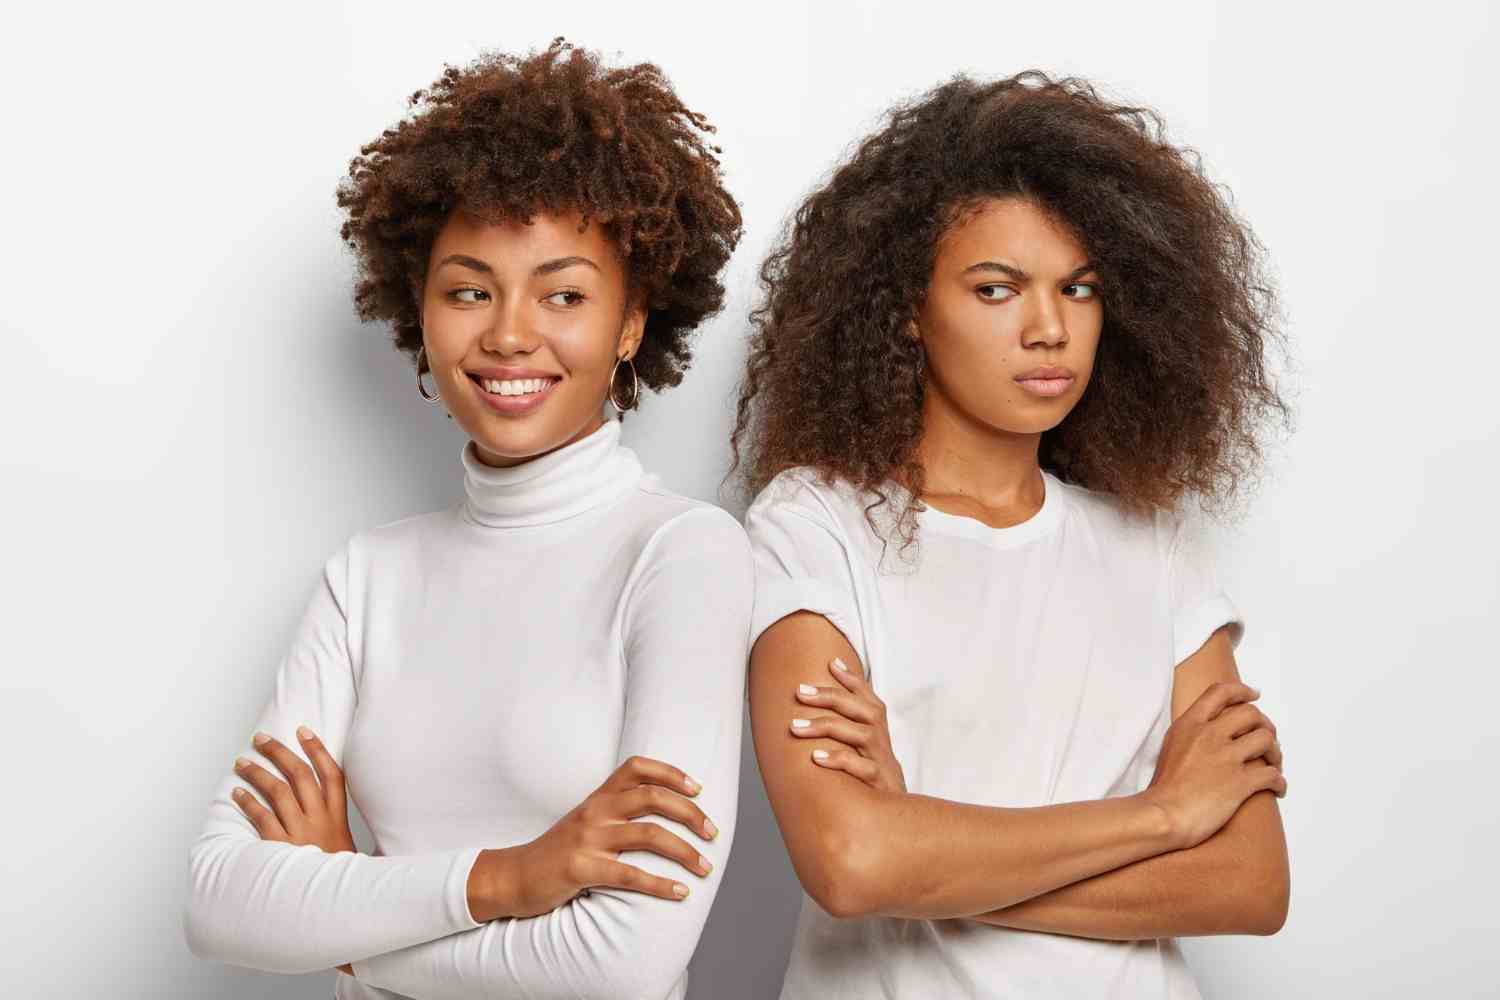 smiling dark skinned woman keeps hands crossed stand shoulder shoulder with best friend who has gloomy upset expression wear white clothes express different emotions